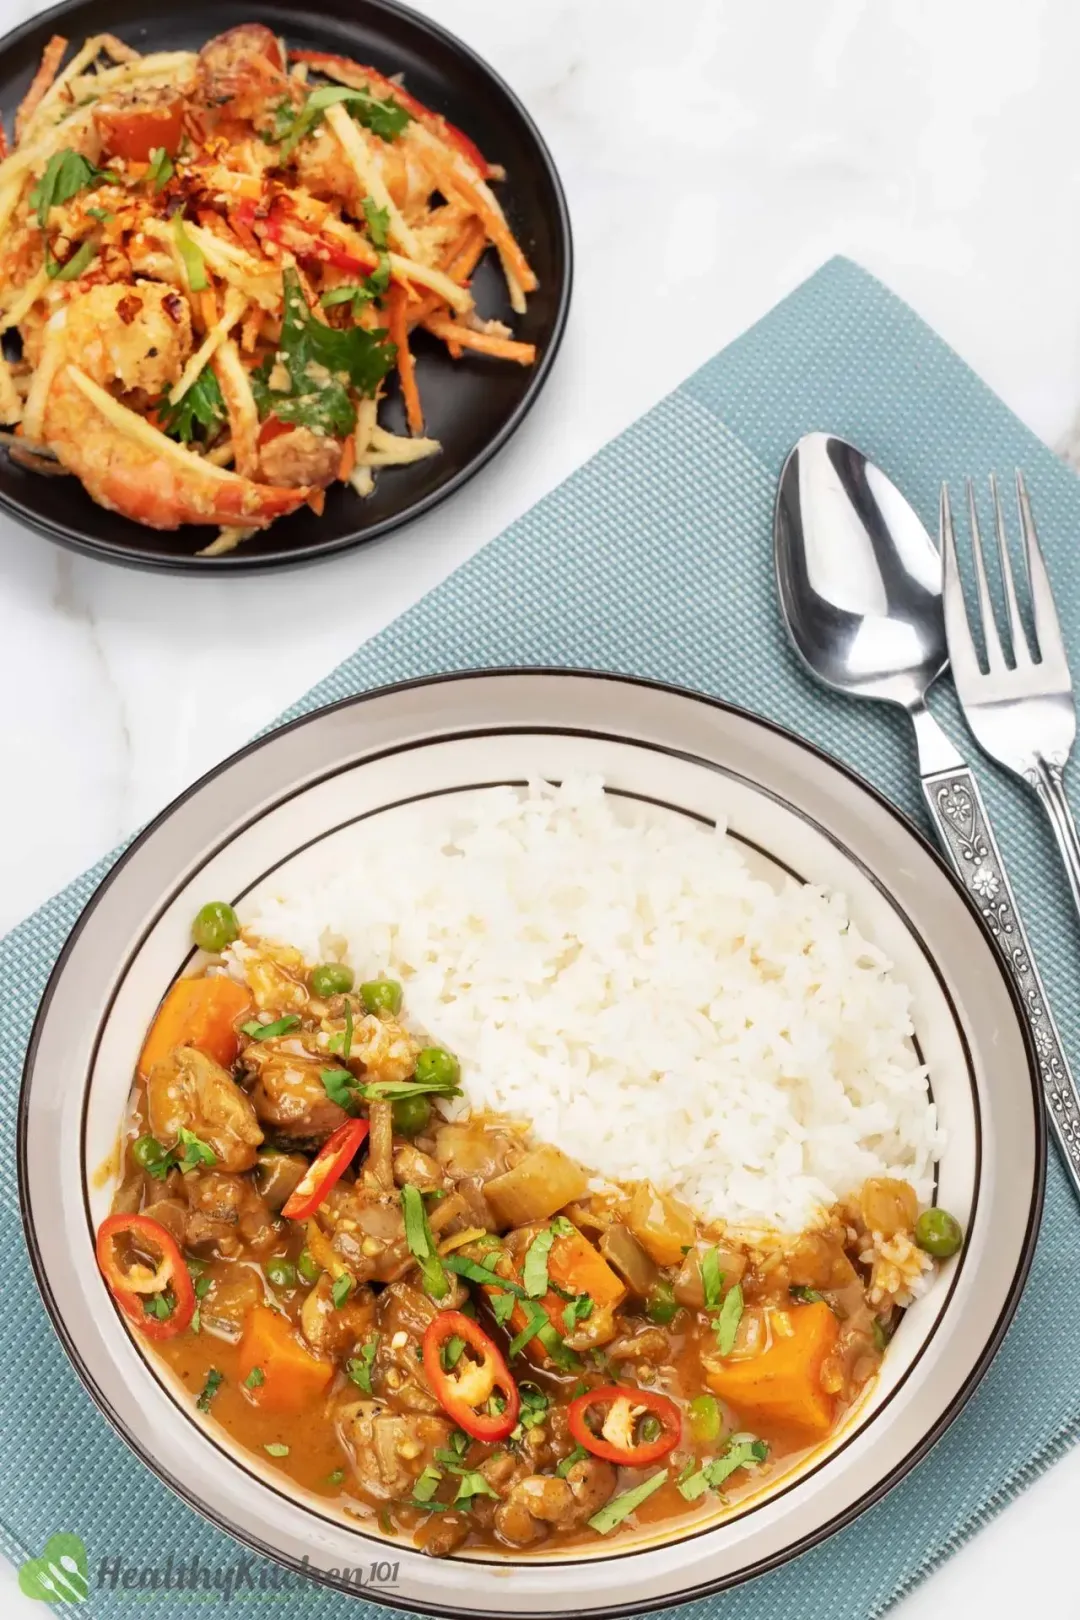 What to Serve With Thai Chicken Curry